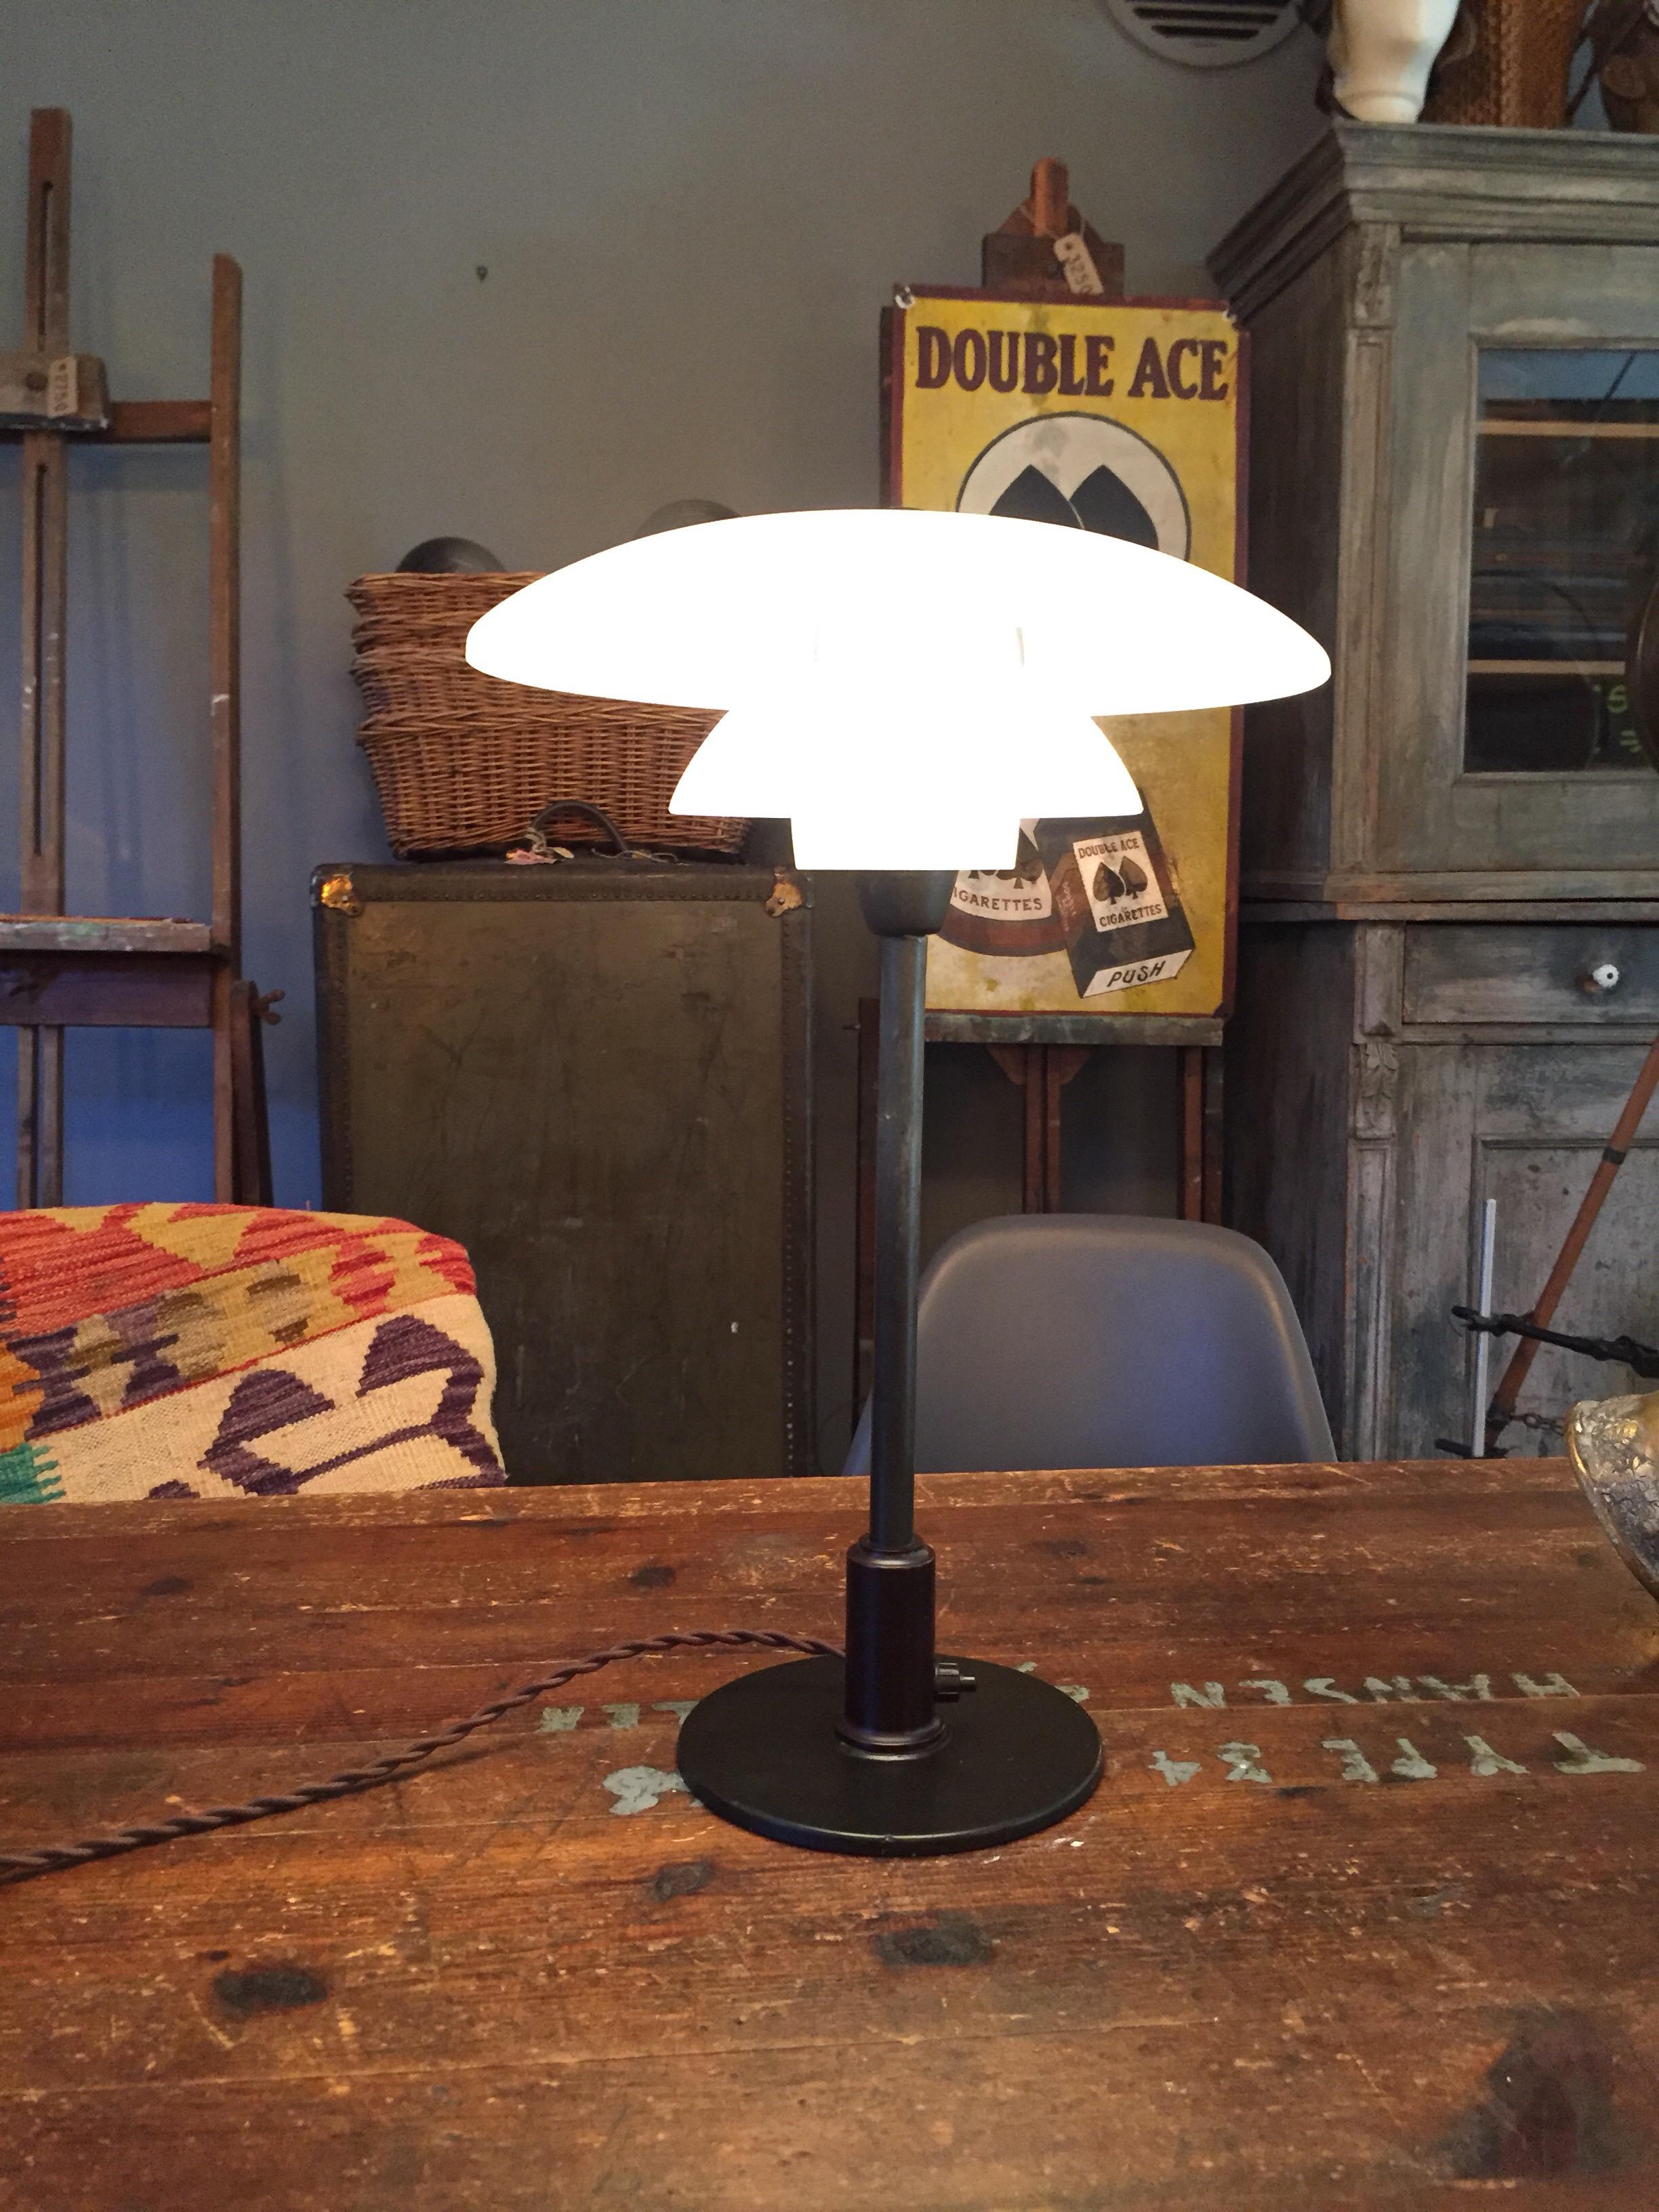 Mid-20th Century Poul Henningsen 3.5/2 Table Lamp from the 1940s Made by Louis Poulsen of Denmark